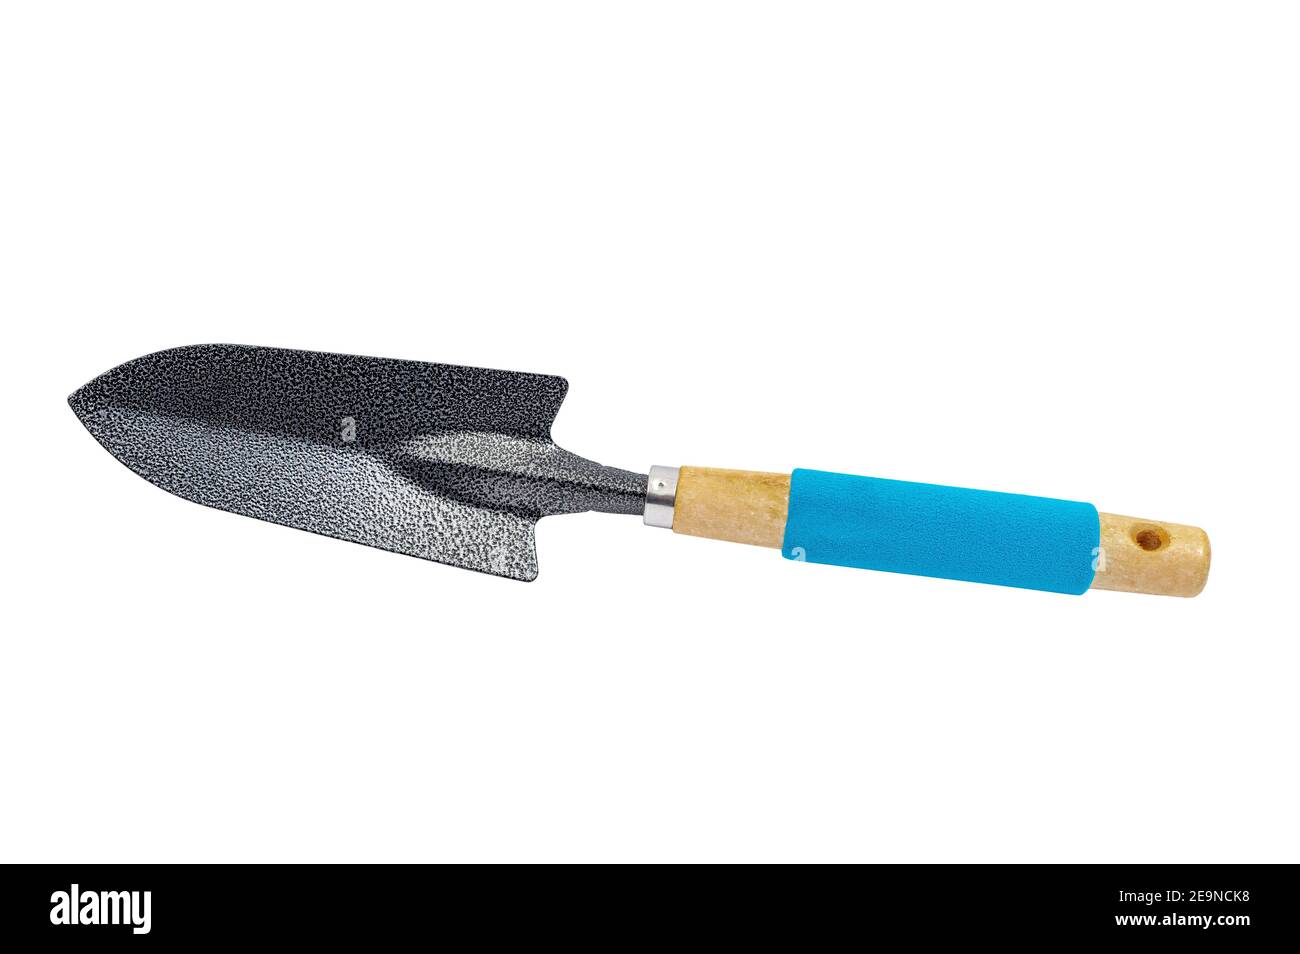 Horizontal shot of a new gardening trowel on a white background. Stock Photo